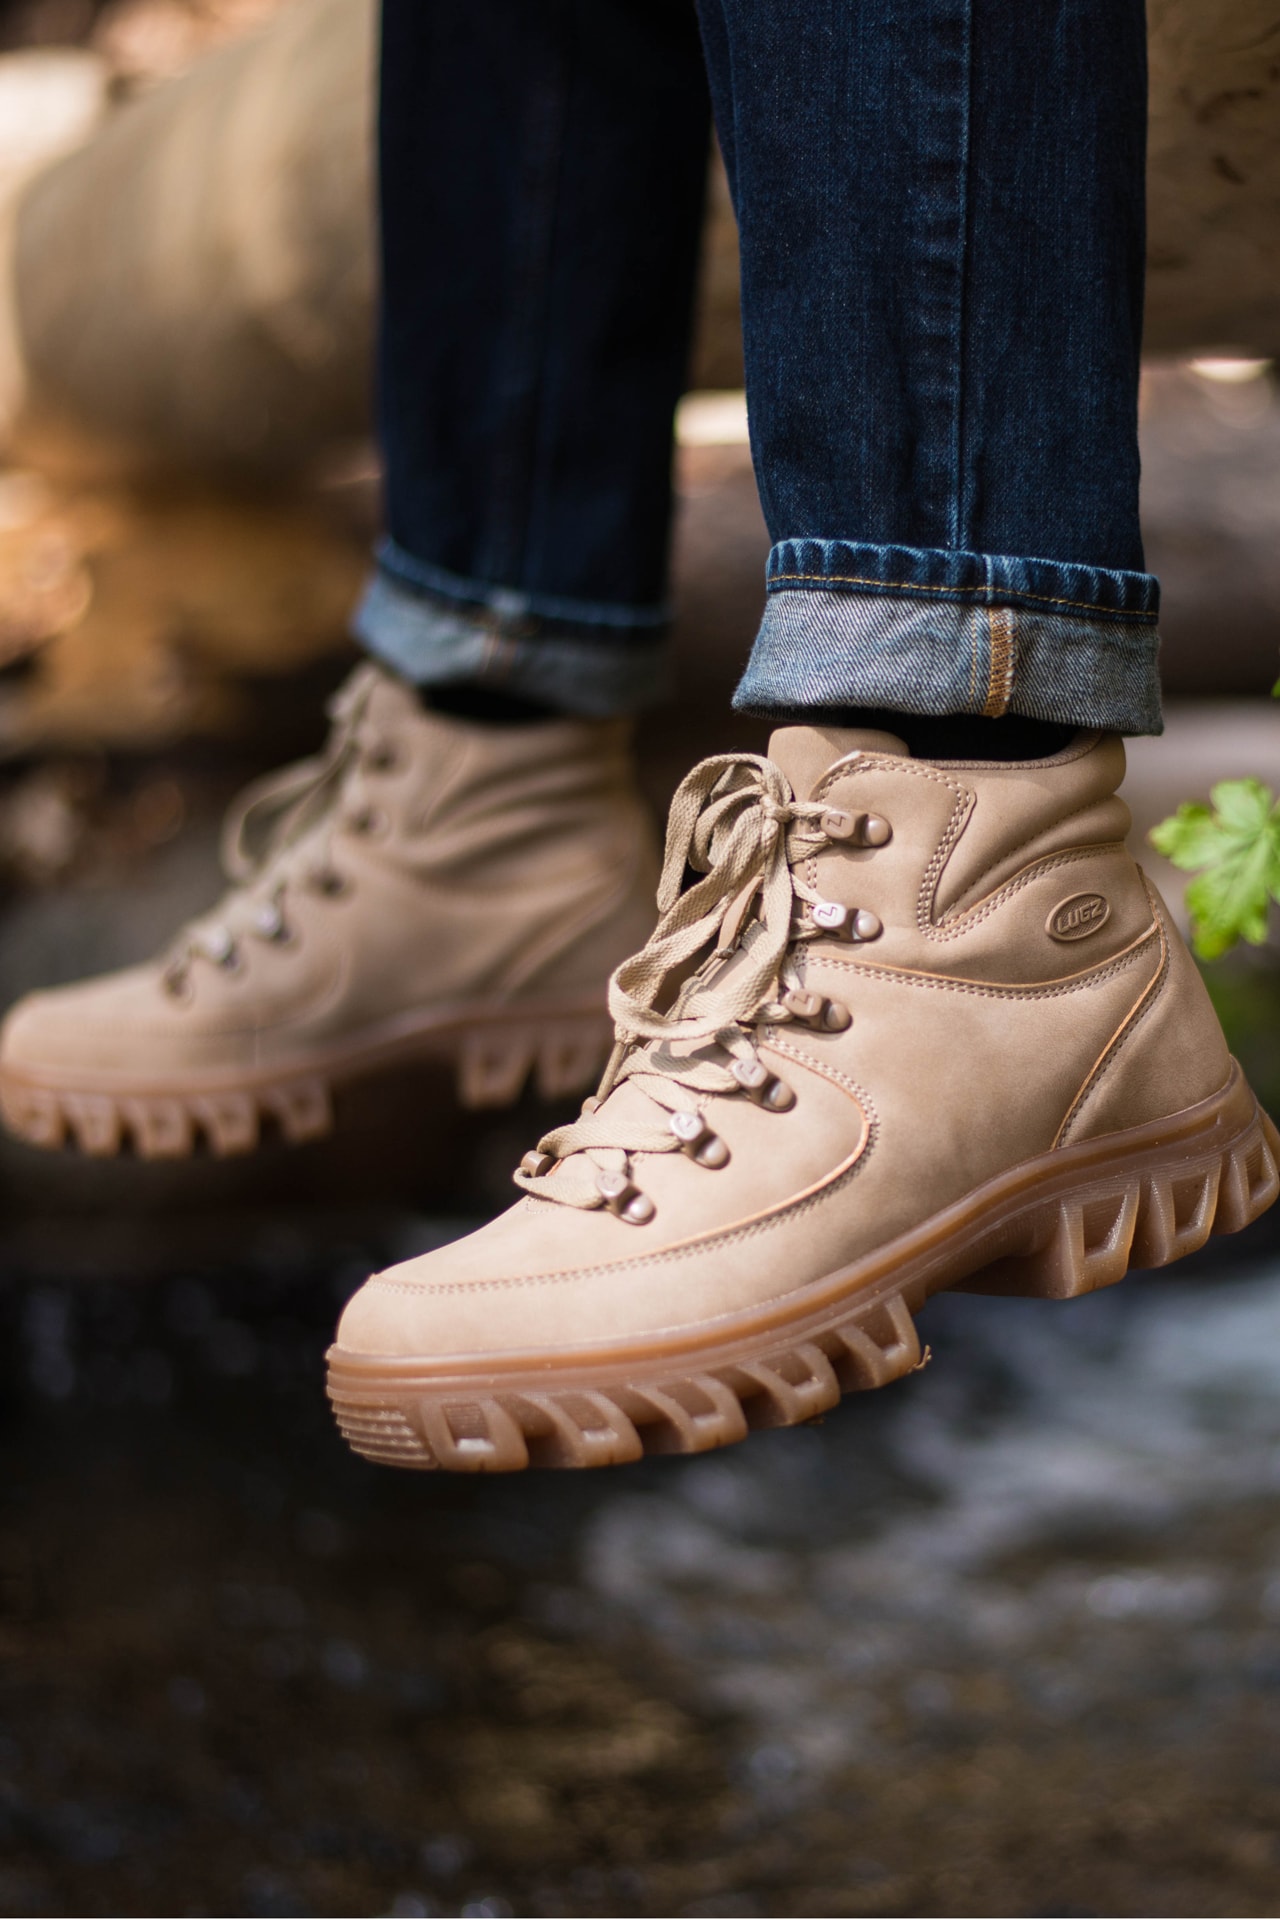 Lugz FW 19 Boot Collection Colorado Joel Adirondack Outdoorsy Exploration Adventure Comfort Durability Support Tech Hip-Hop Culture flexastride hiking trail upper rugged outsole anti-fatigue midsole